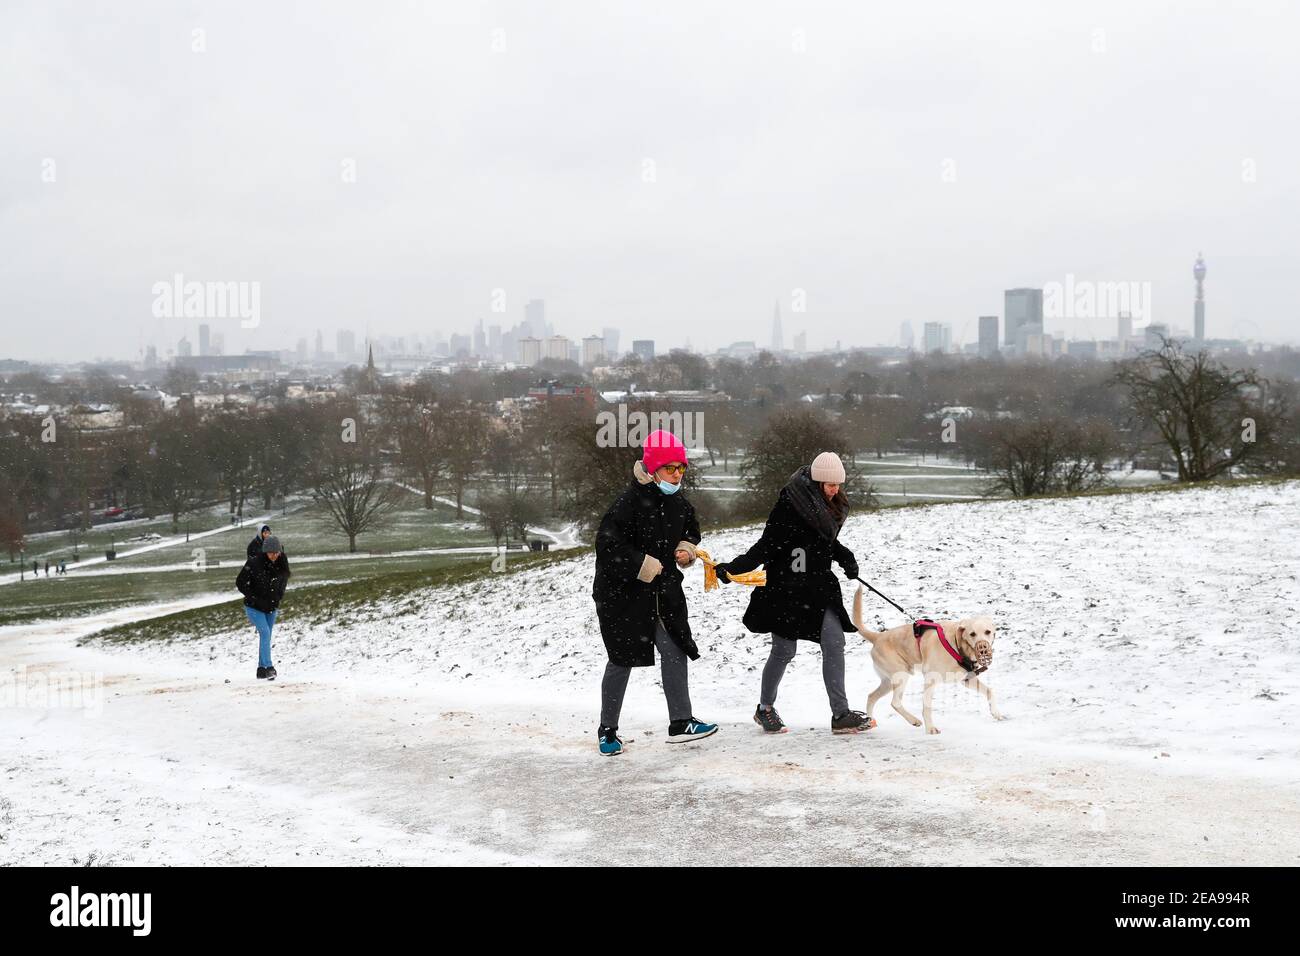 London, Britain. 8th Feb, 2021. People climb up the hill in the snow in London, Britain, on Feb. 8, 2021. TO GO WITH 'Snow, ice warnings issued for most parts of UK' Credit: Han Yan/Xinhua/Alamy Live News Stock Photo